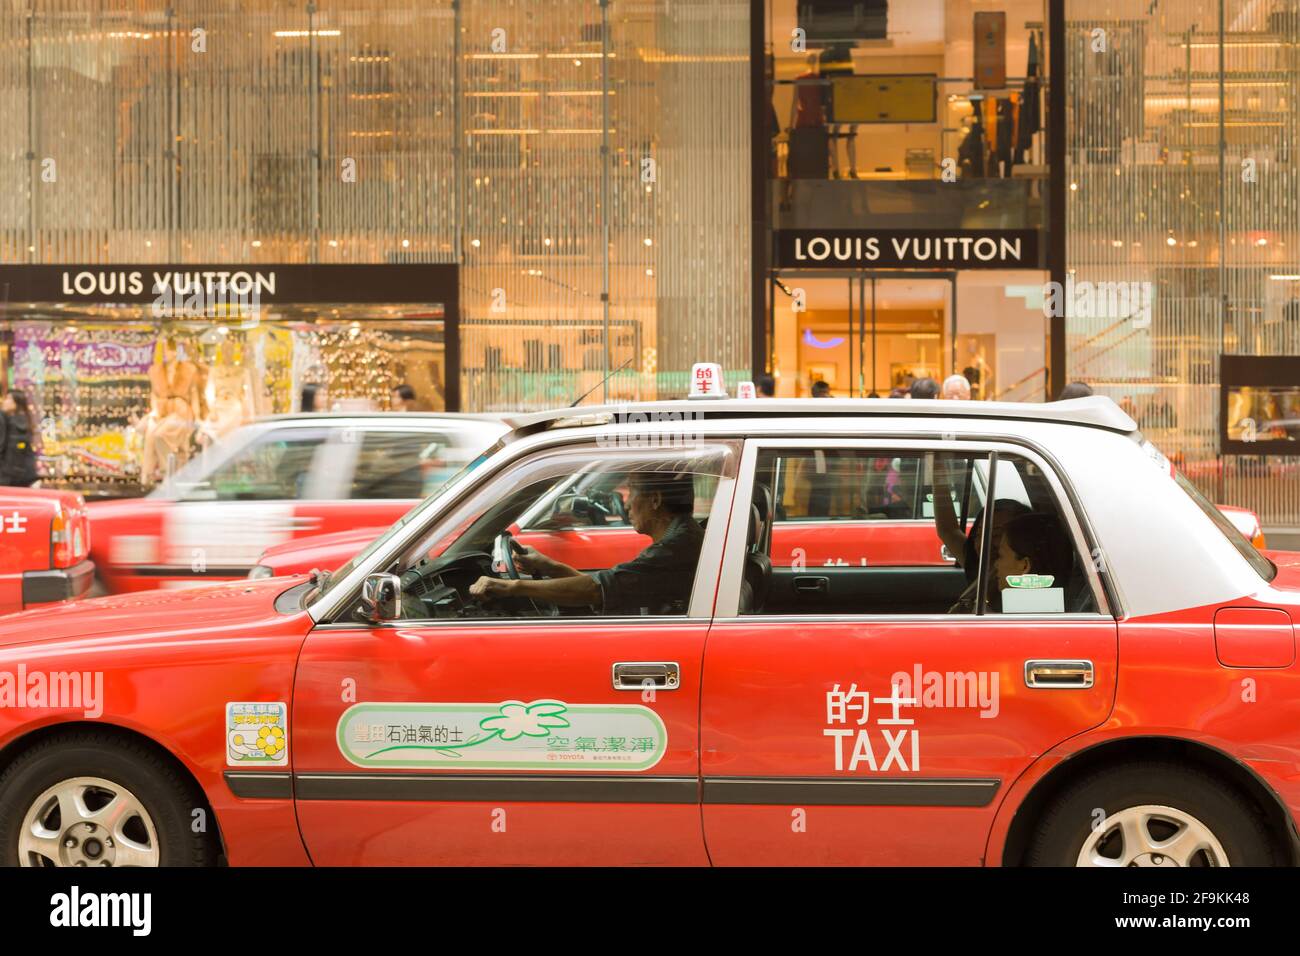 Hong Kong, Central district, China, Asia - Traditional red taxis in front of a Louis Vuitton store at Central district Hong Kong. Stock Photo